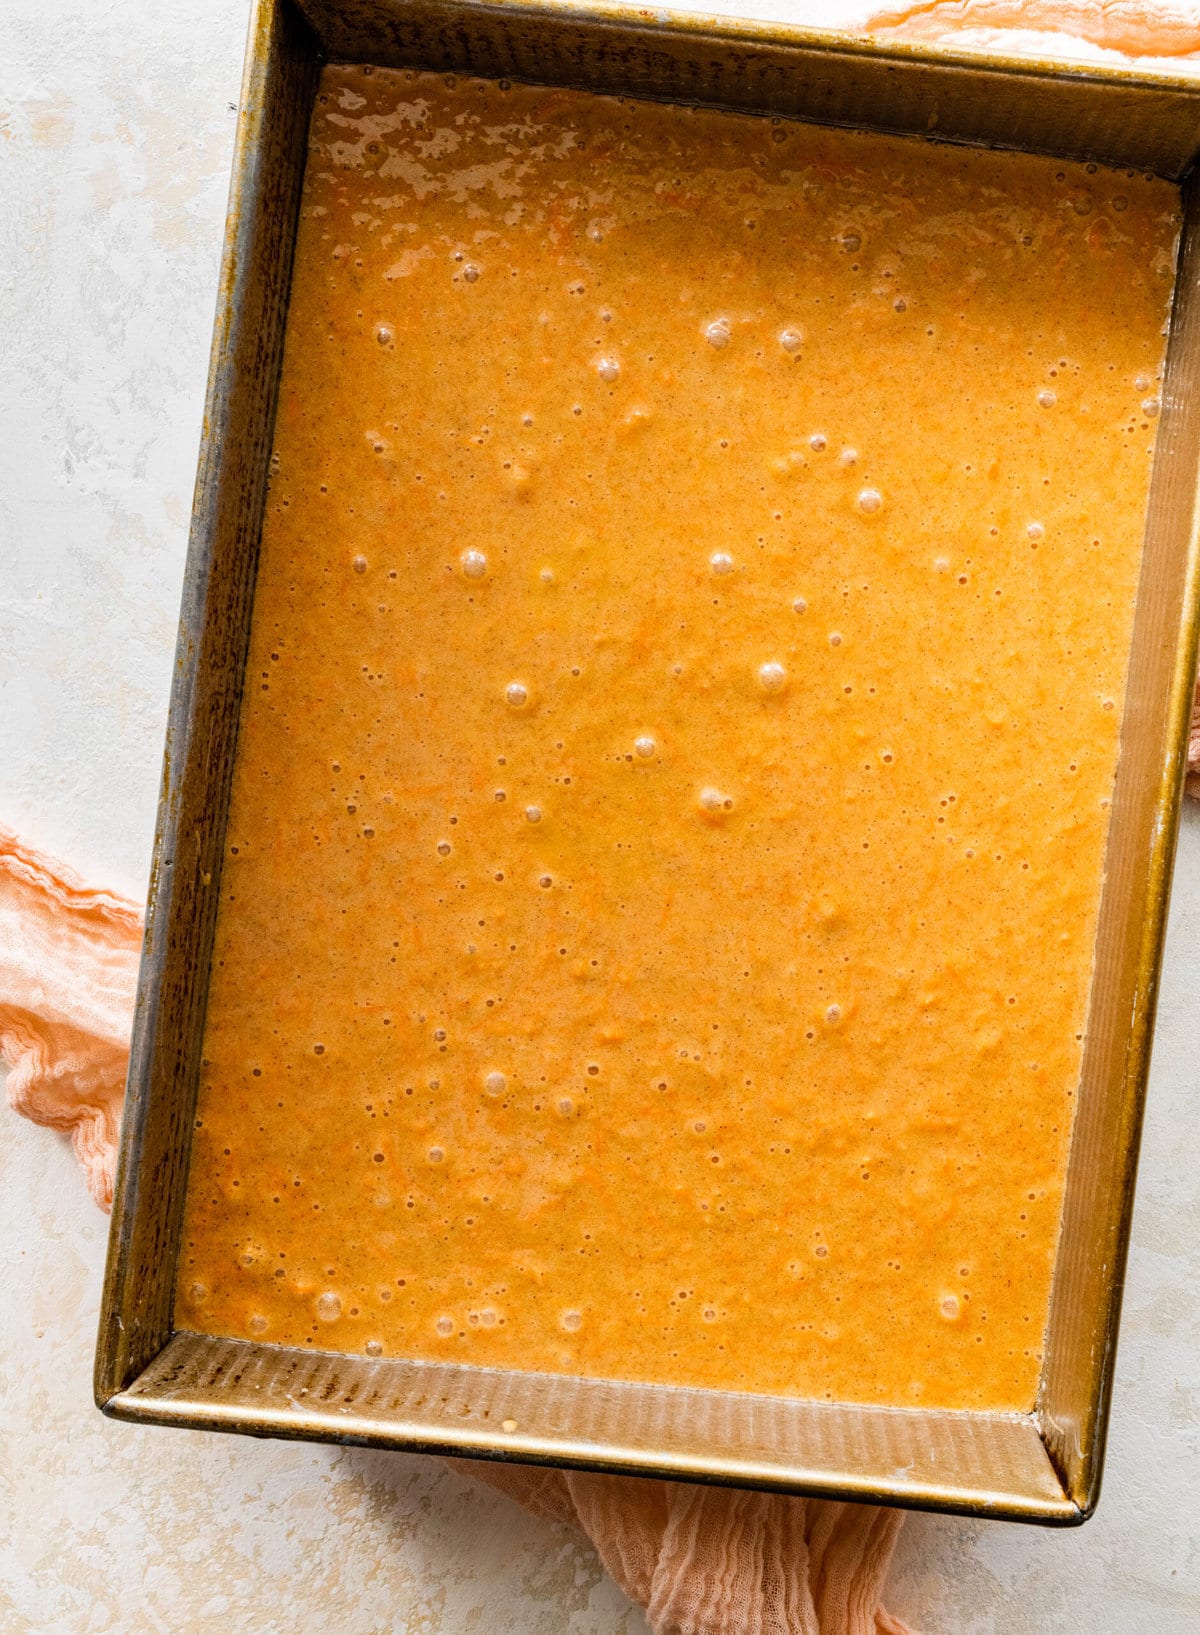 How to make easy carrot cake step-by-step photos: putting the cake batter in the pan.